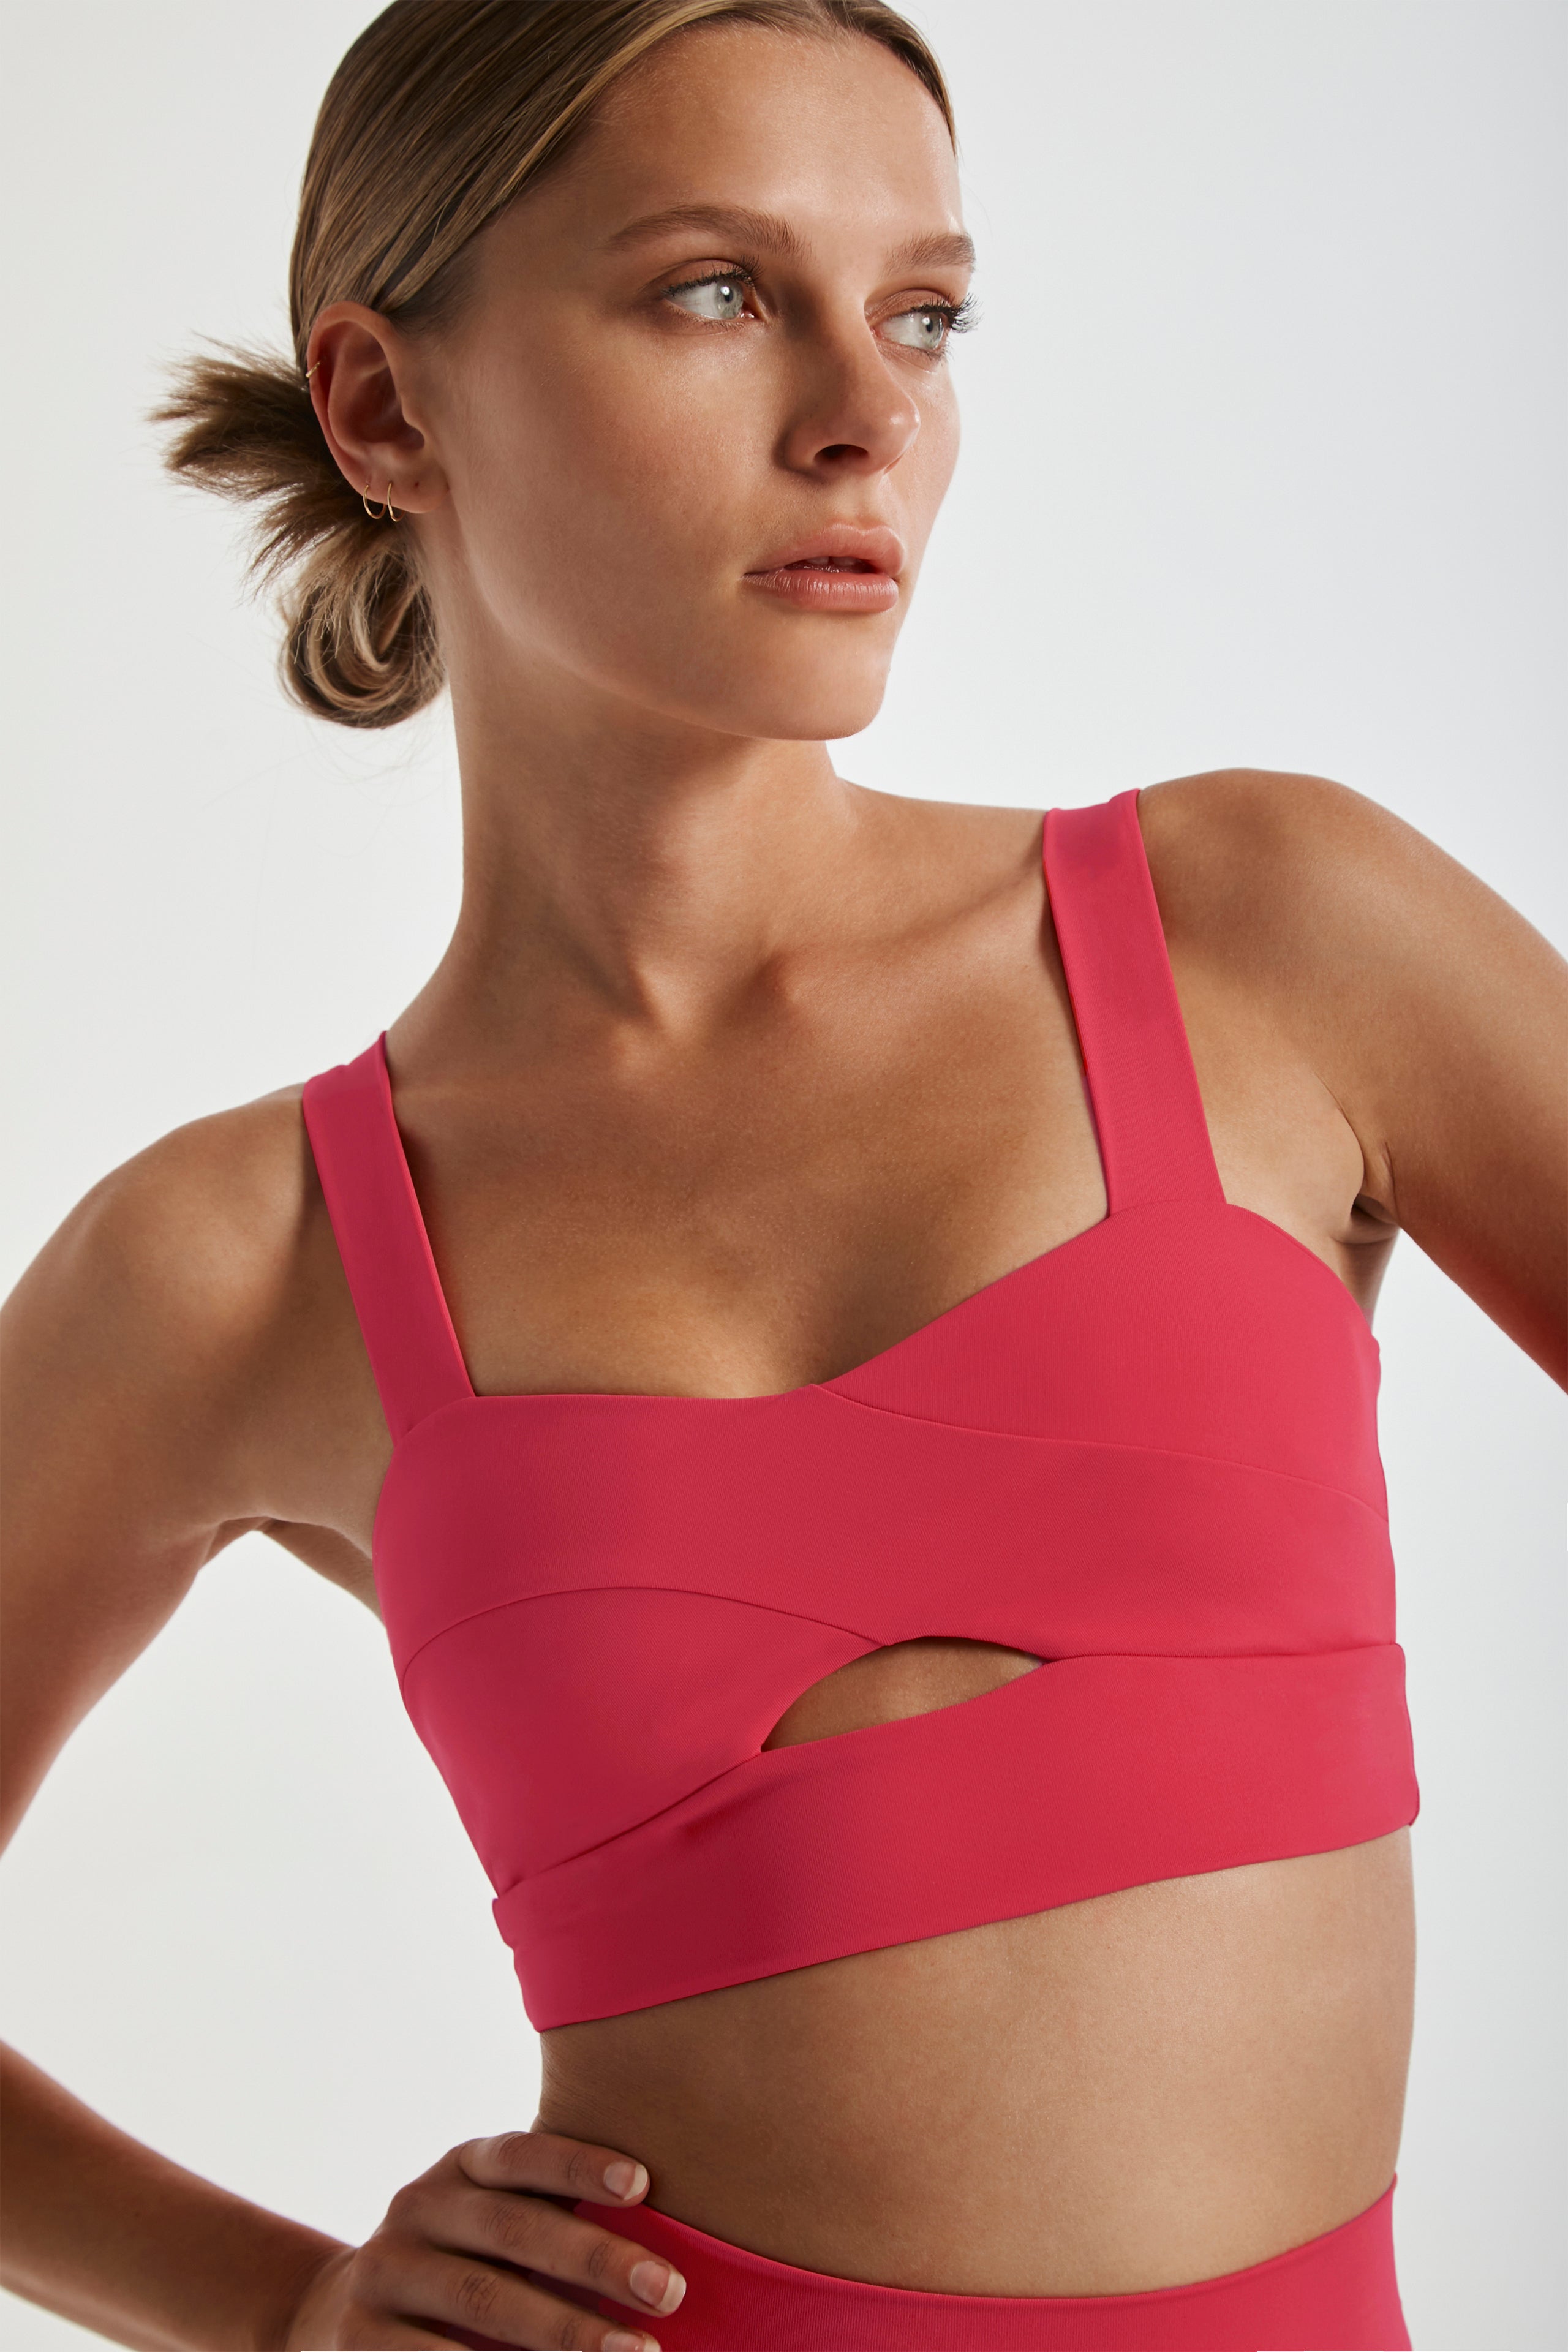 Kyodan Rust Color Sports Bra Red - $10 - From Nicole